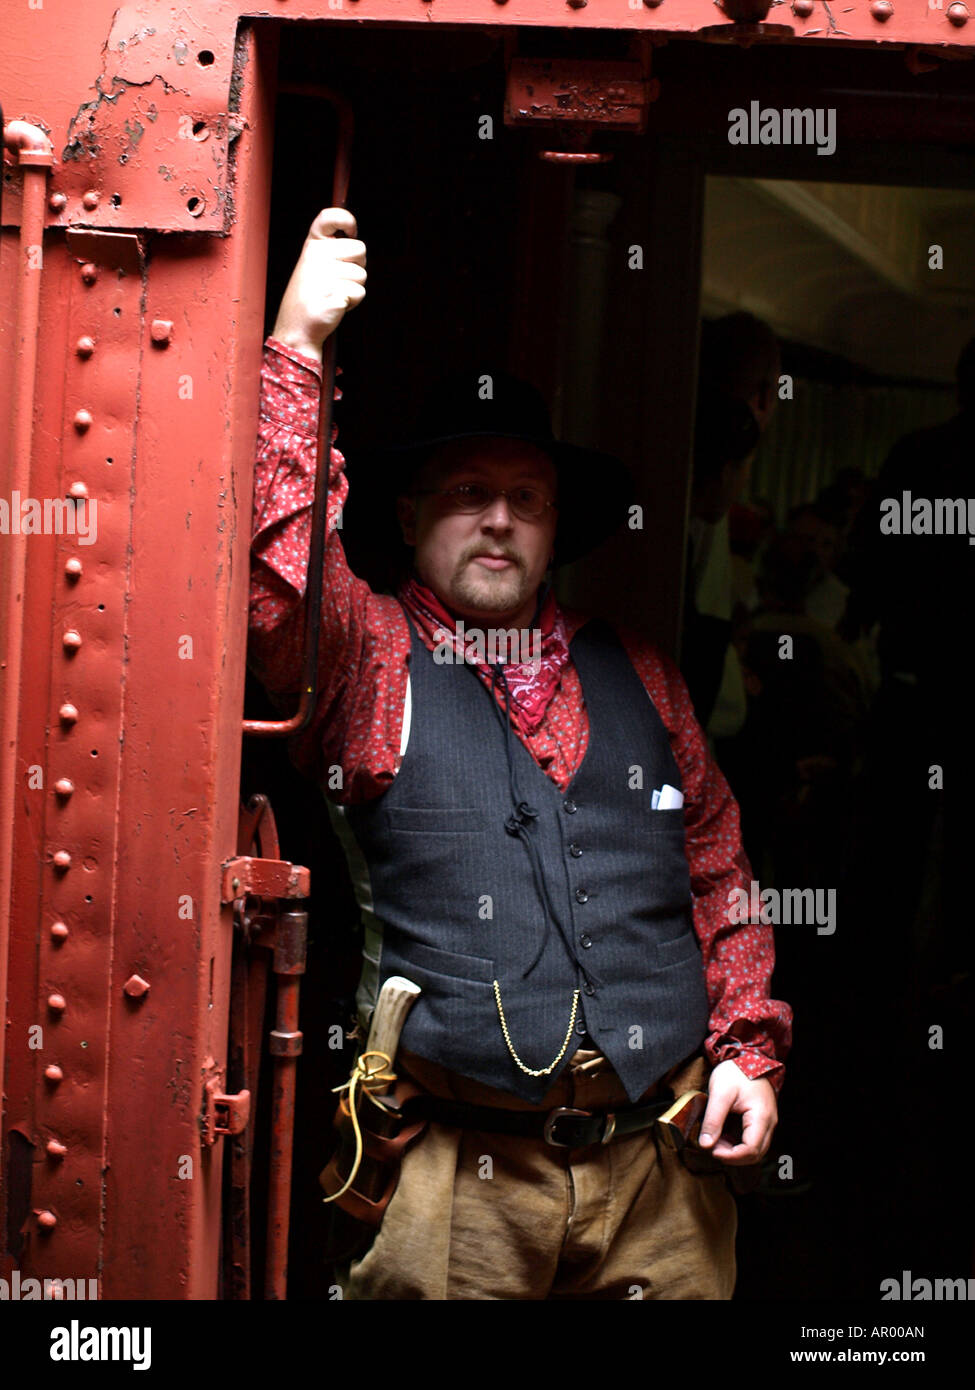 A western cowboy with a knife riding an old passenger train car Stock Photo